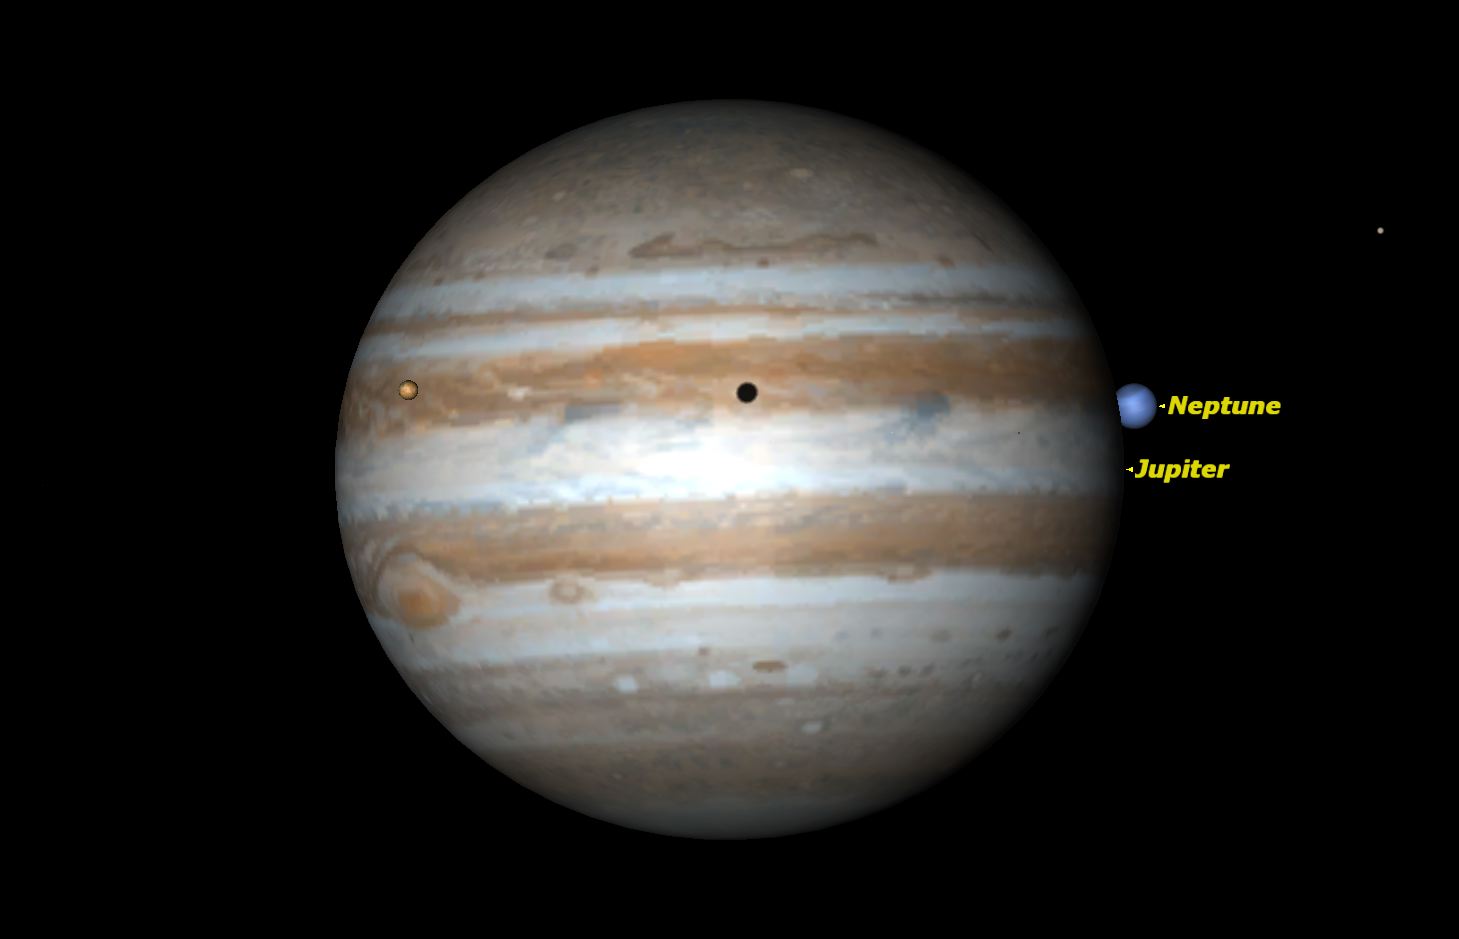 On the night of 1613 January 3/4, Jupiter actually occulted Neptune. Credit: Starry Night Software.